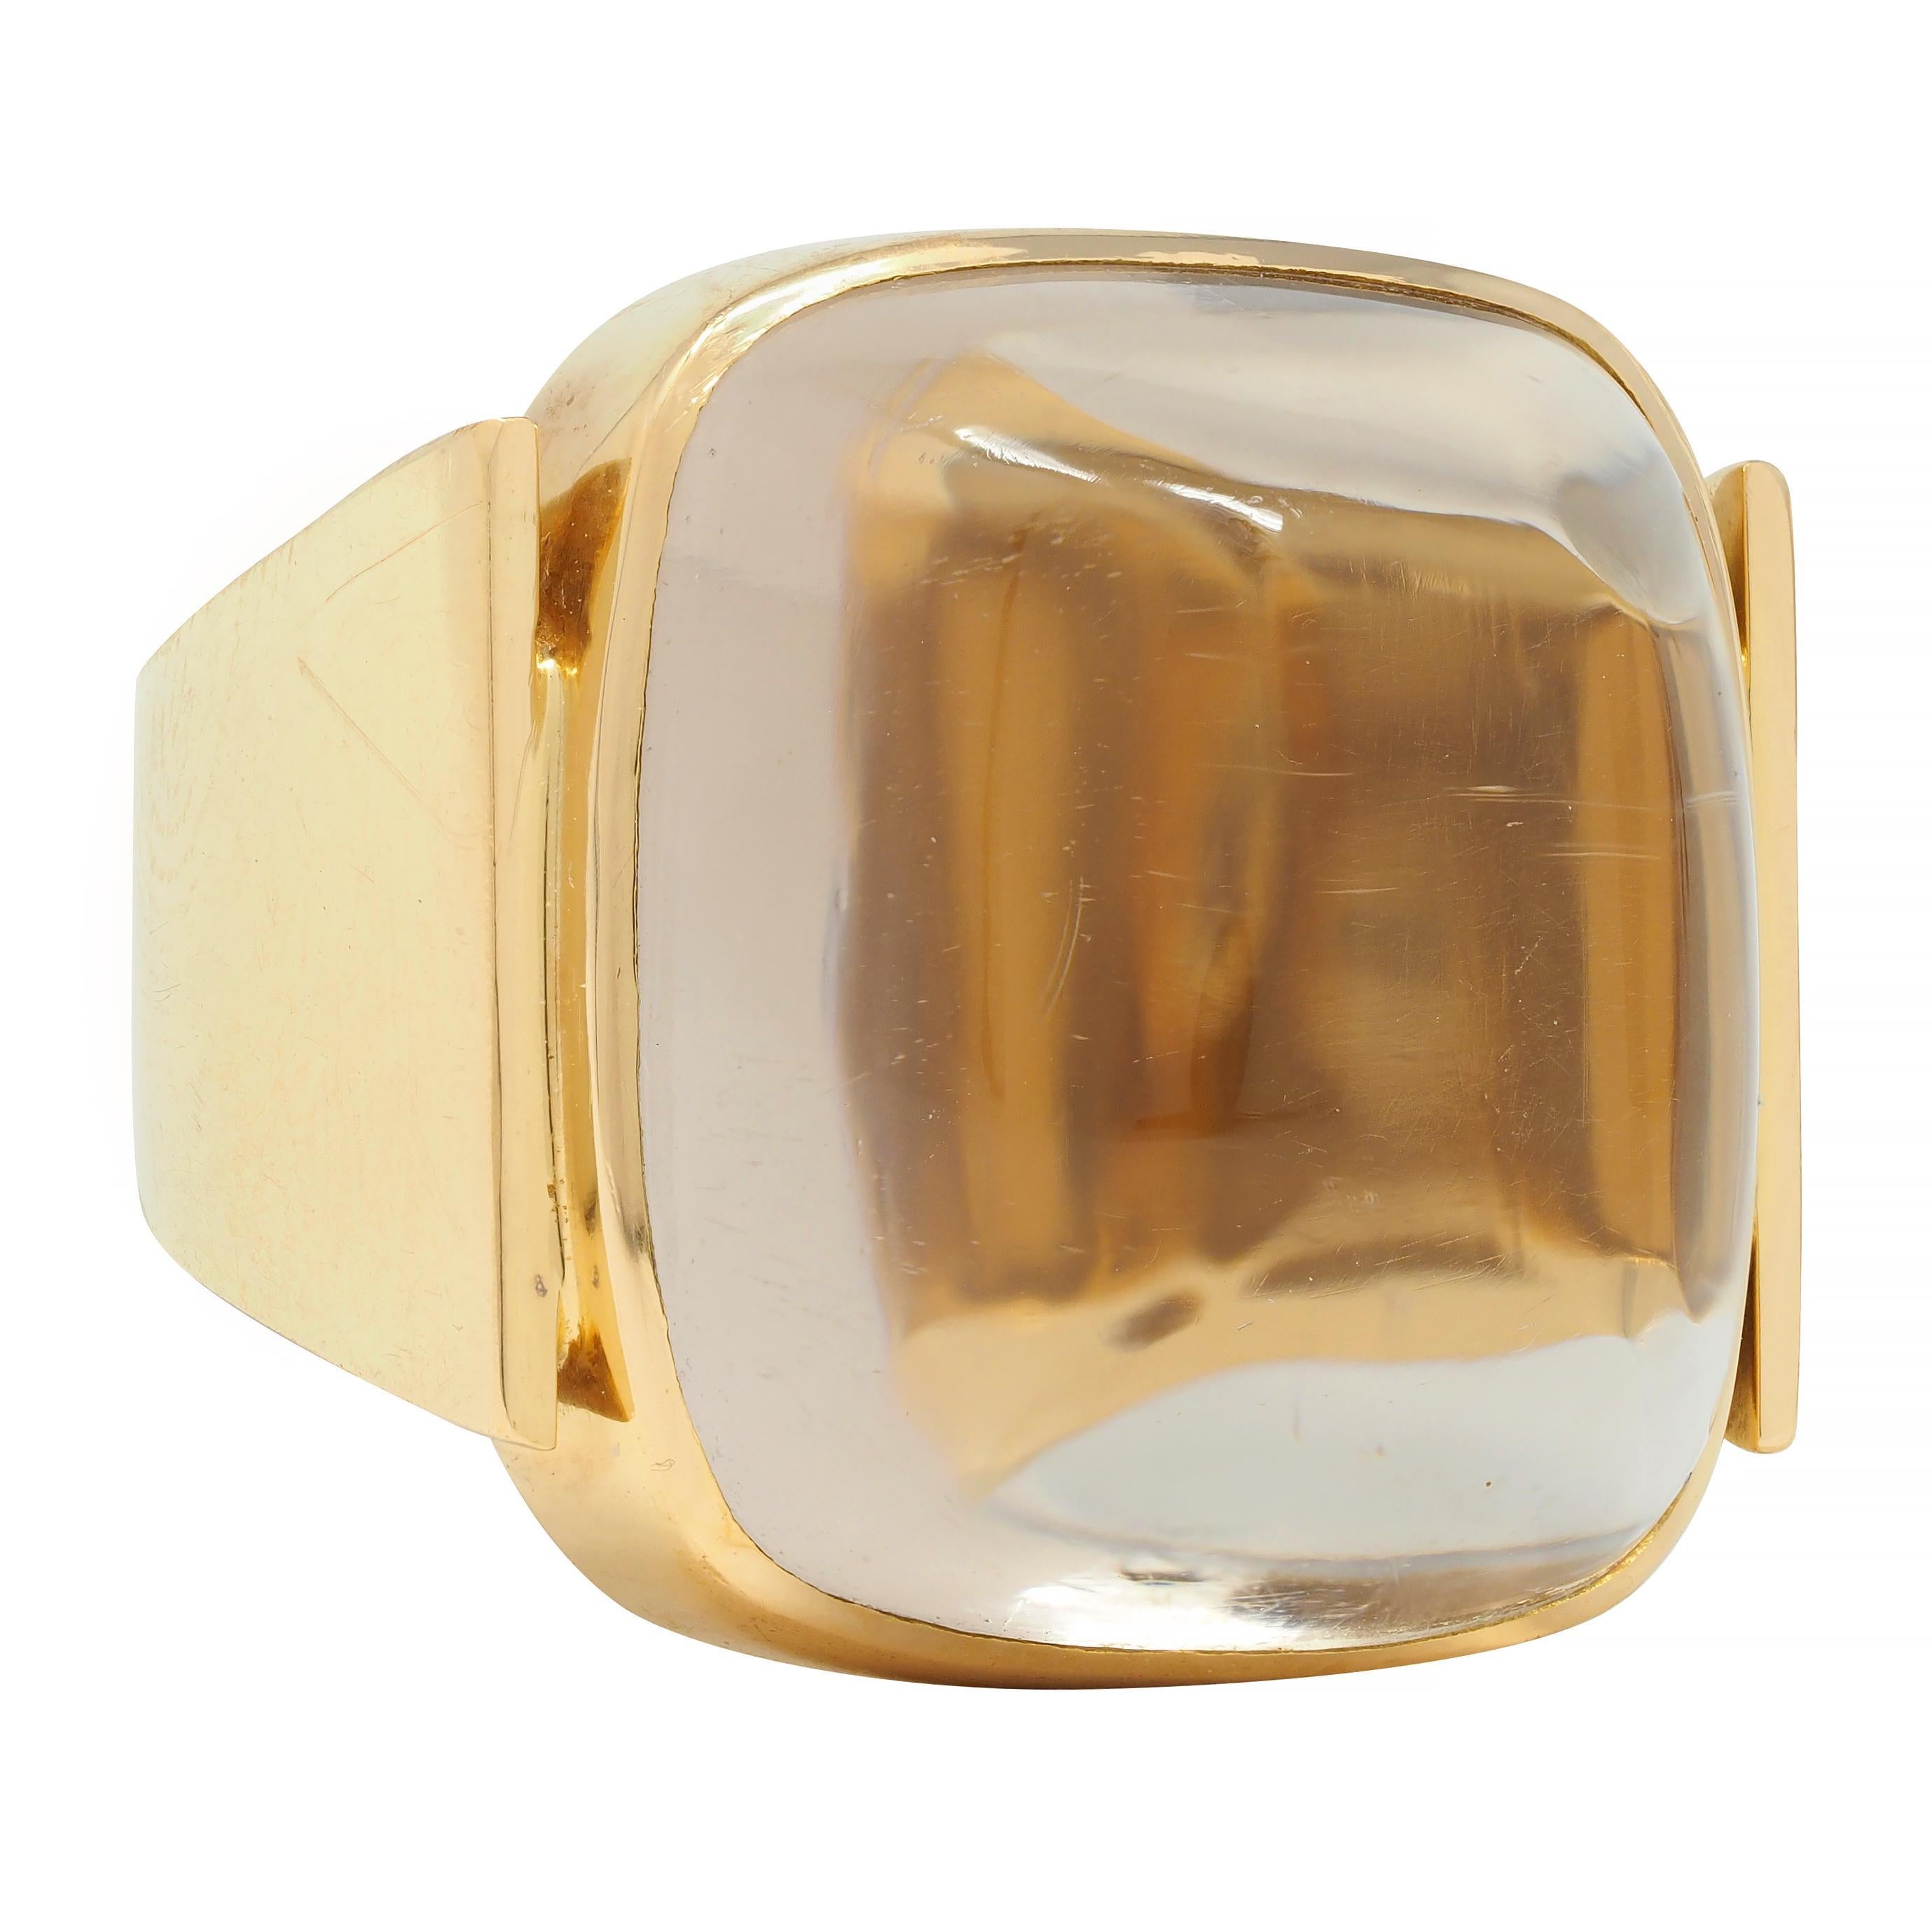 Modernist Smoky Quartz Sugarloaf Cabochon 18 Karat Yellow Gold Vintage Ring In Excellent Condition For Sale In Philadelphia, PA